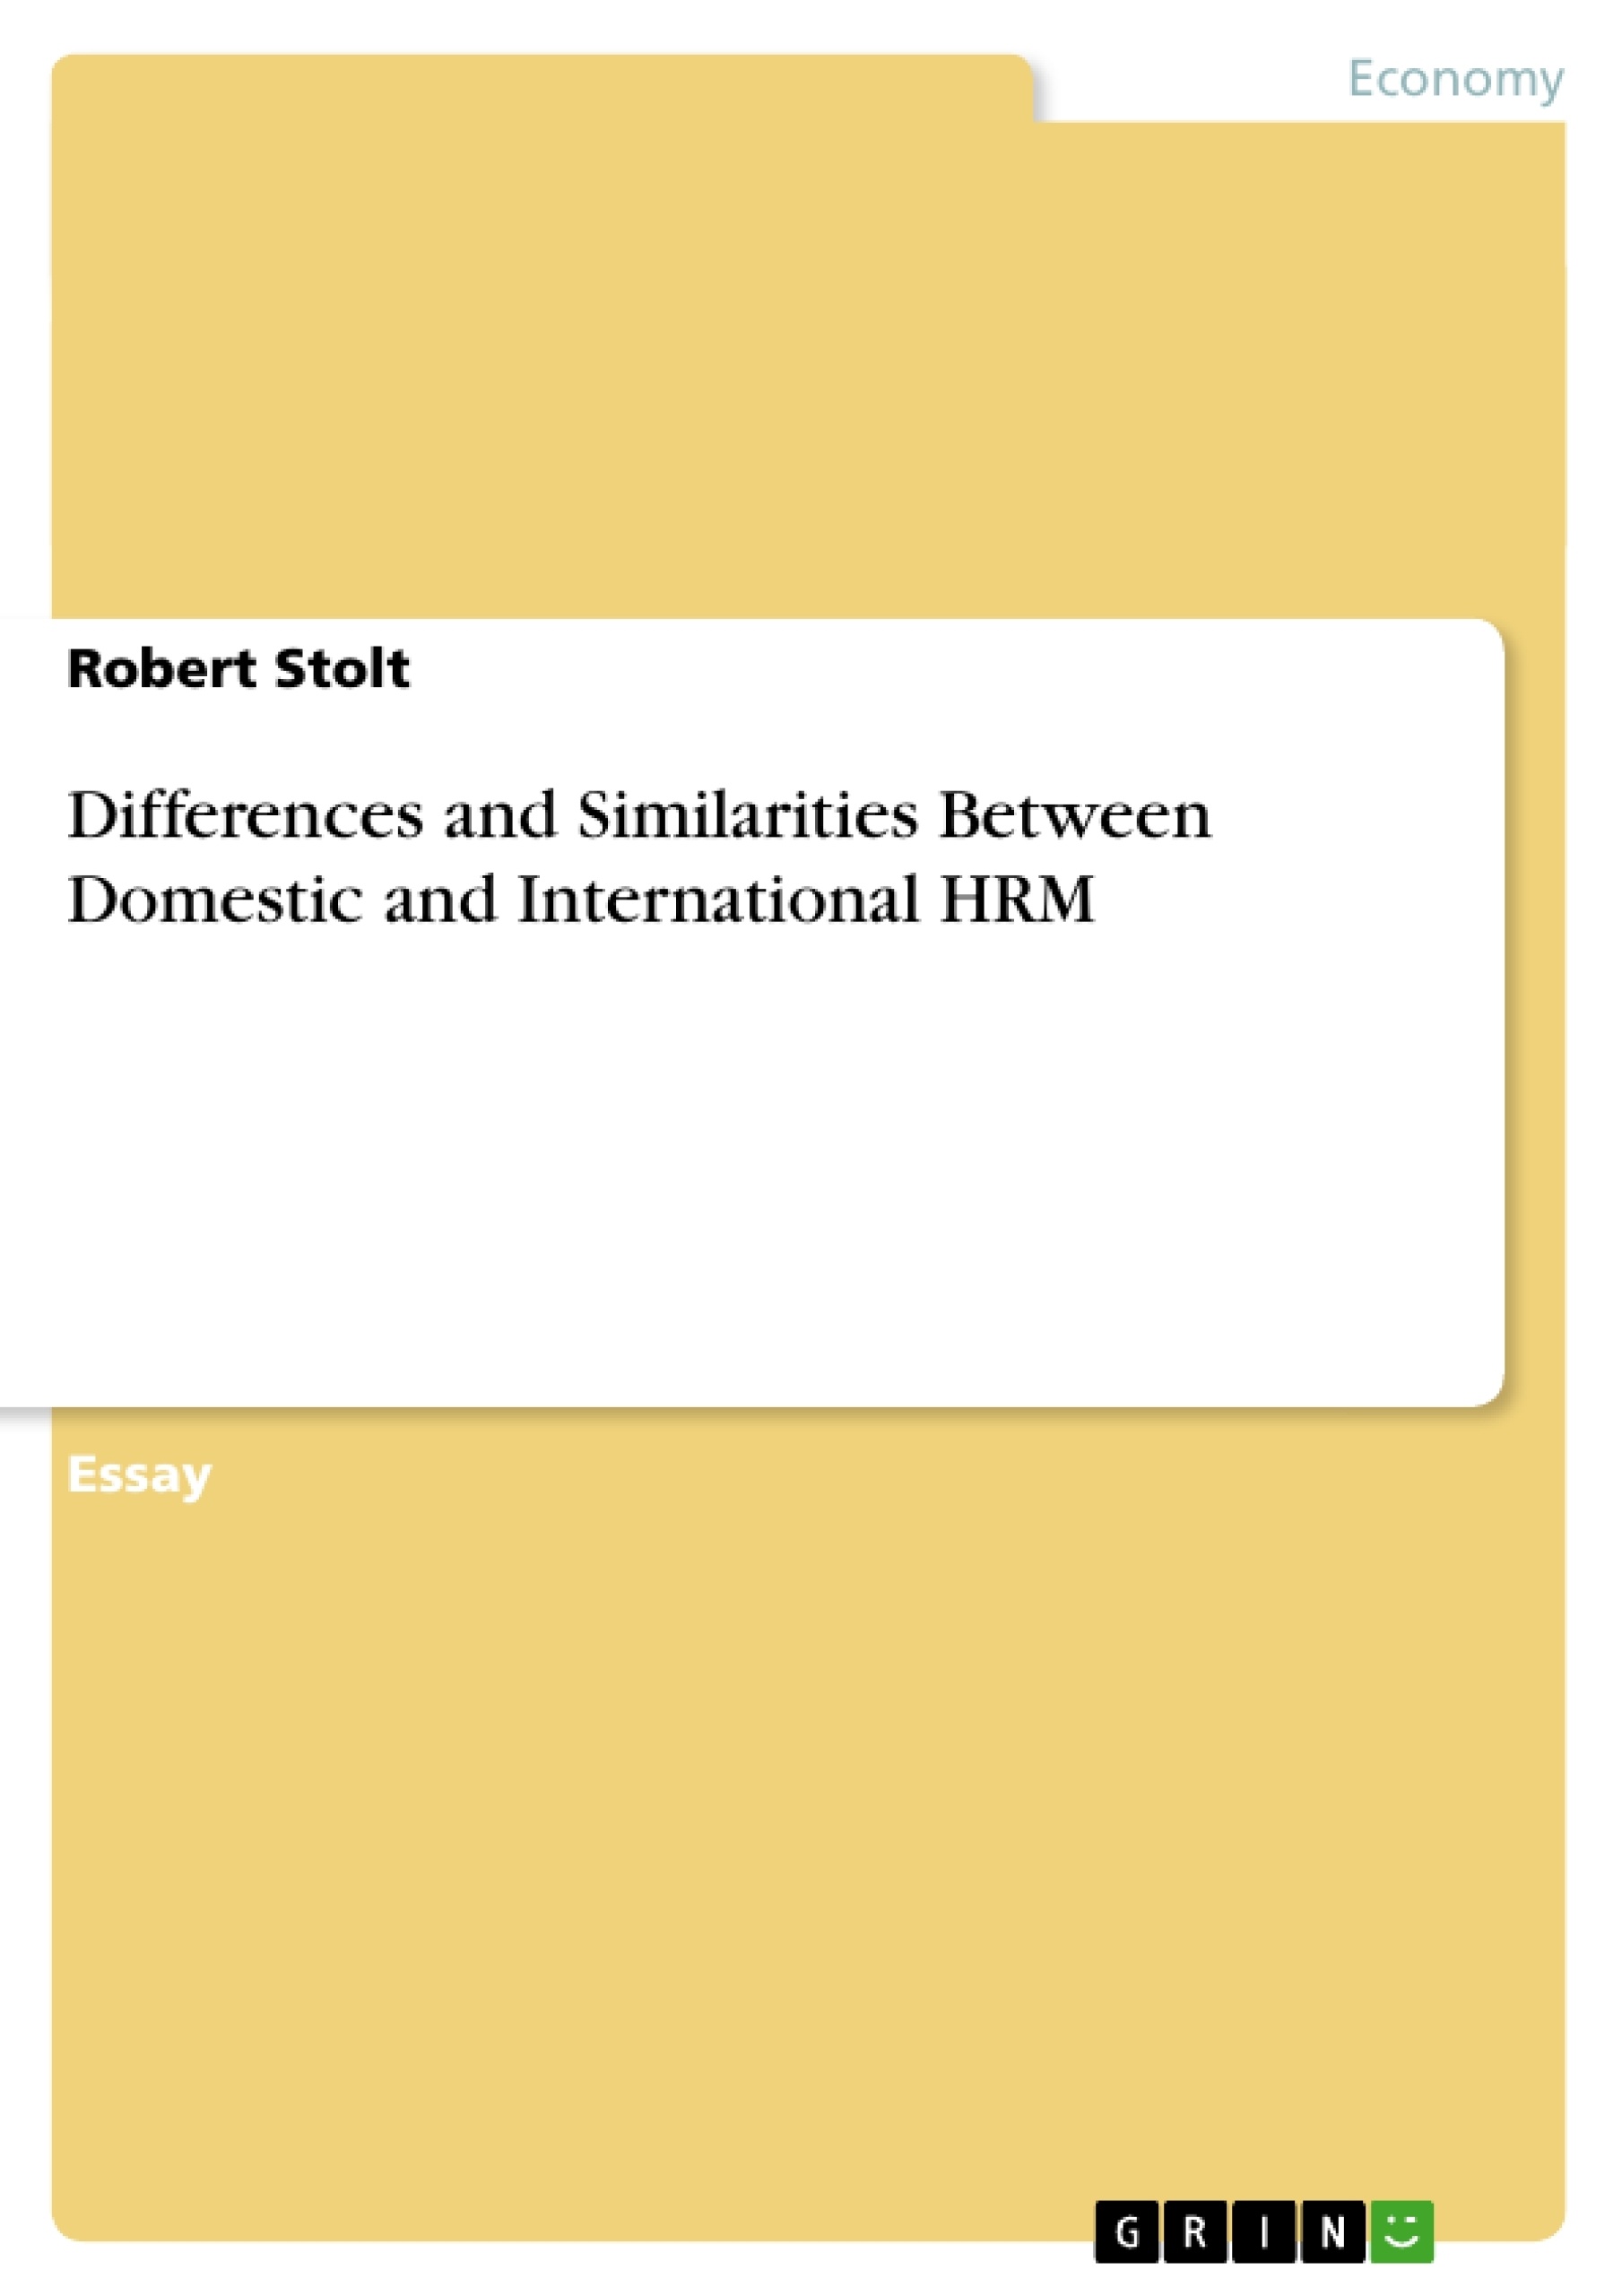 Title: Differences and Similarities Between Domestic and International HRM